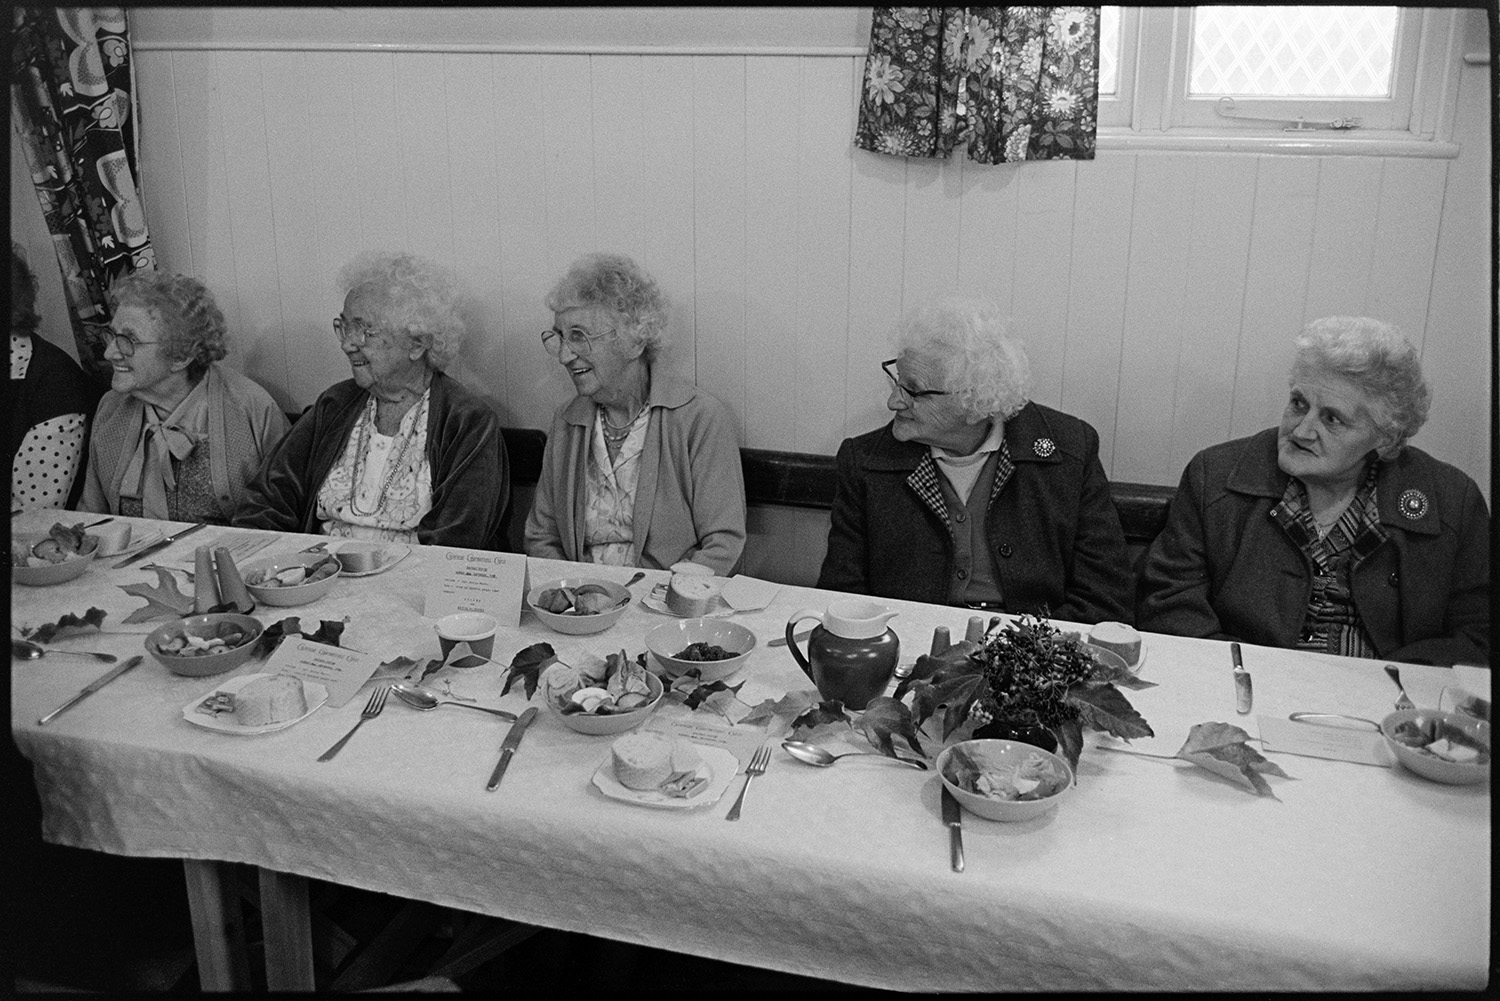 Congregational chapel Harvest supper, singing after meal, sale produce on display.
[Five elderly women sitting at a table at the Chulmleigh Congregational chapel Harvest supper. There is cutlery, crockery, table decorations and plates of bread rolls laid out on the table in front of them.]